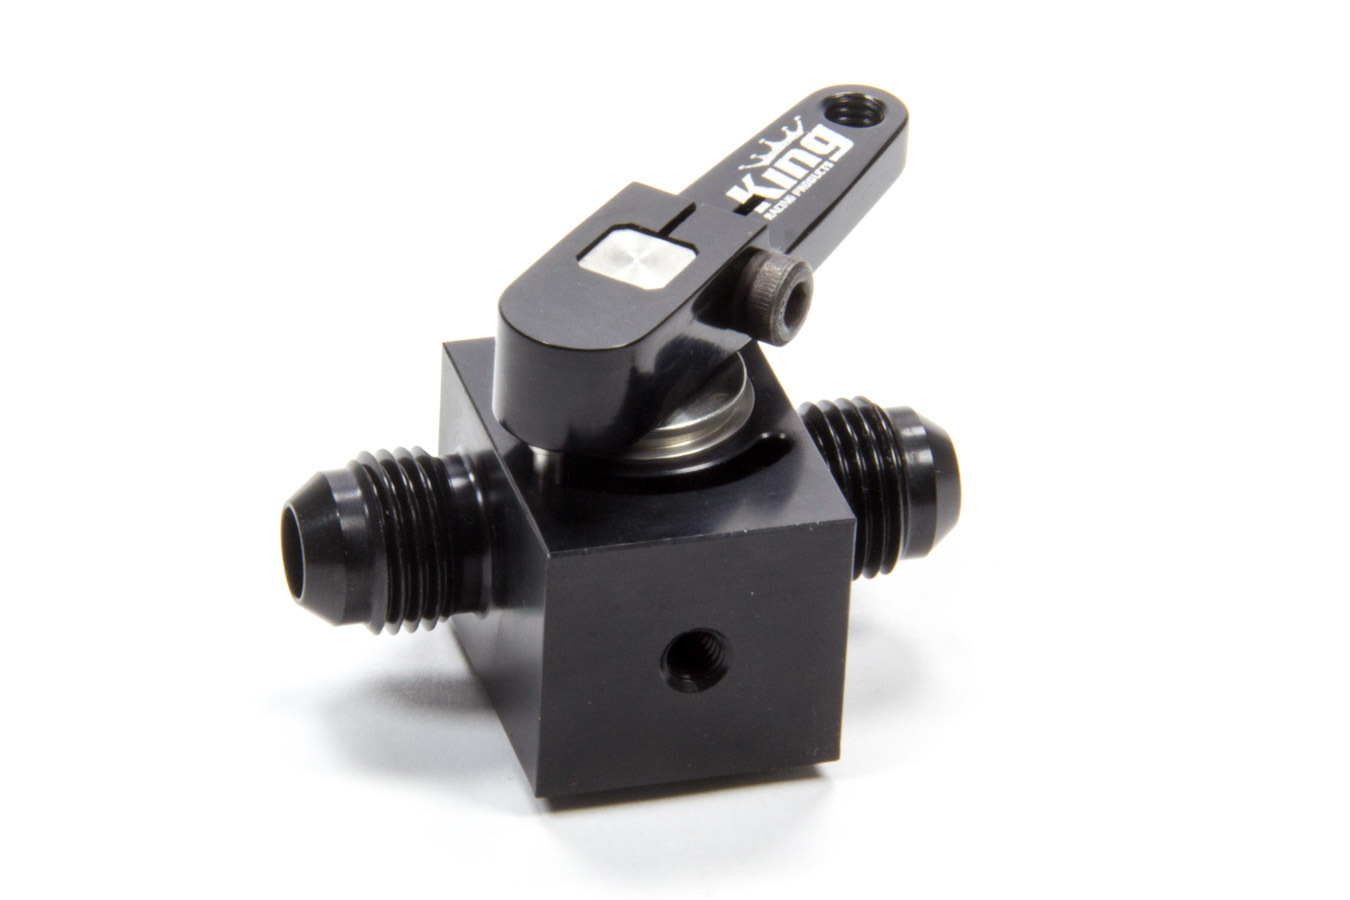 King Racing Products 4510 Shutoff Valve, Fuel Shutoff, In-Line, 6 AN Male Inlet, 6 AN Male Outlet, Aluminum, Black Anodized, Each